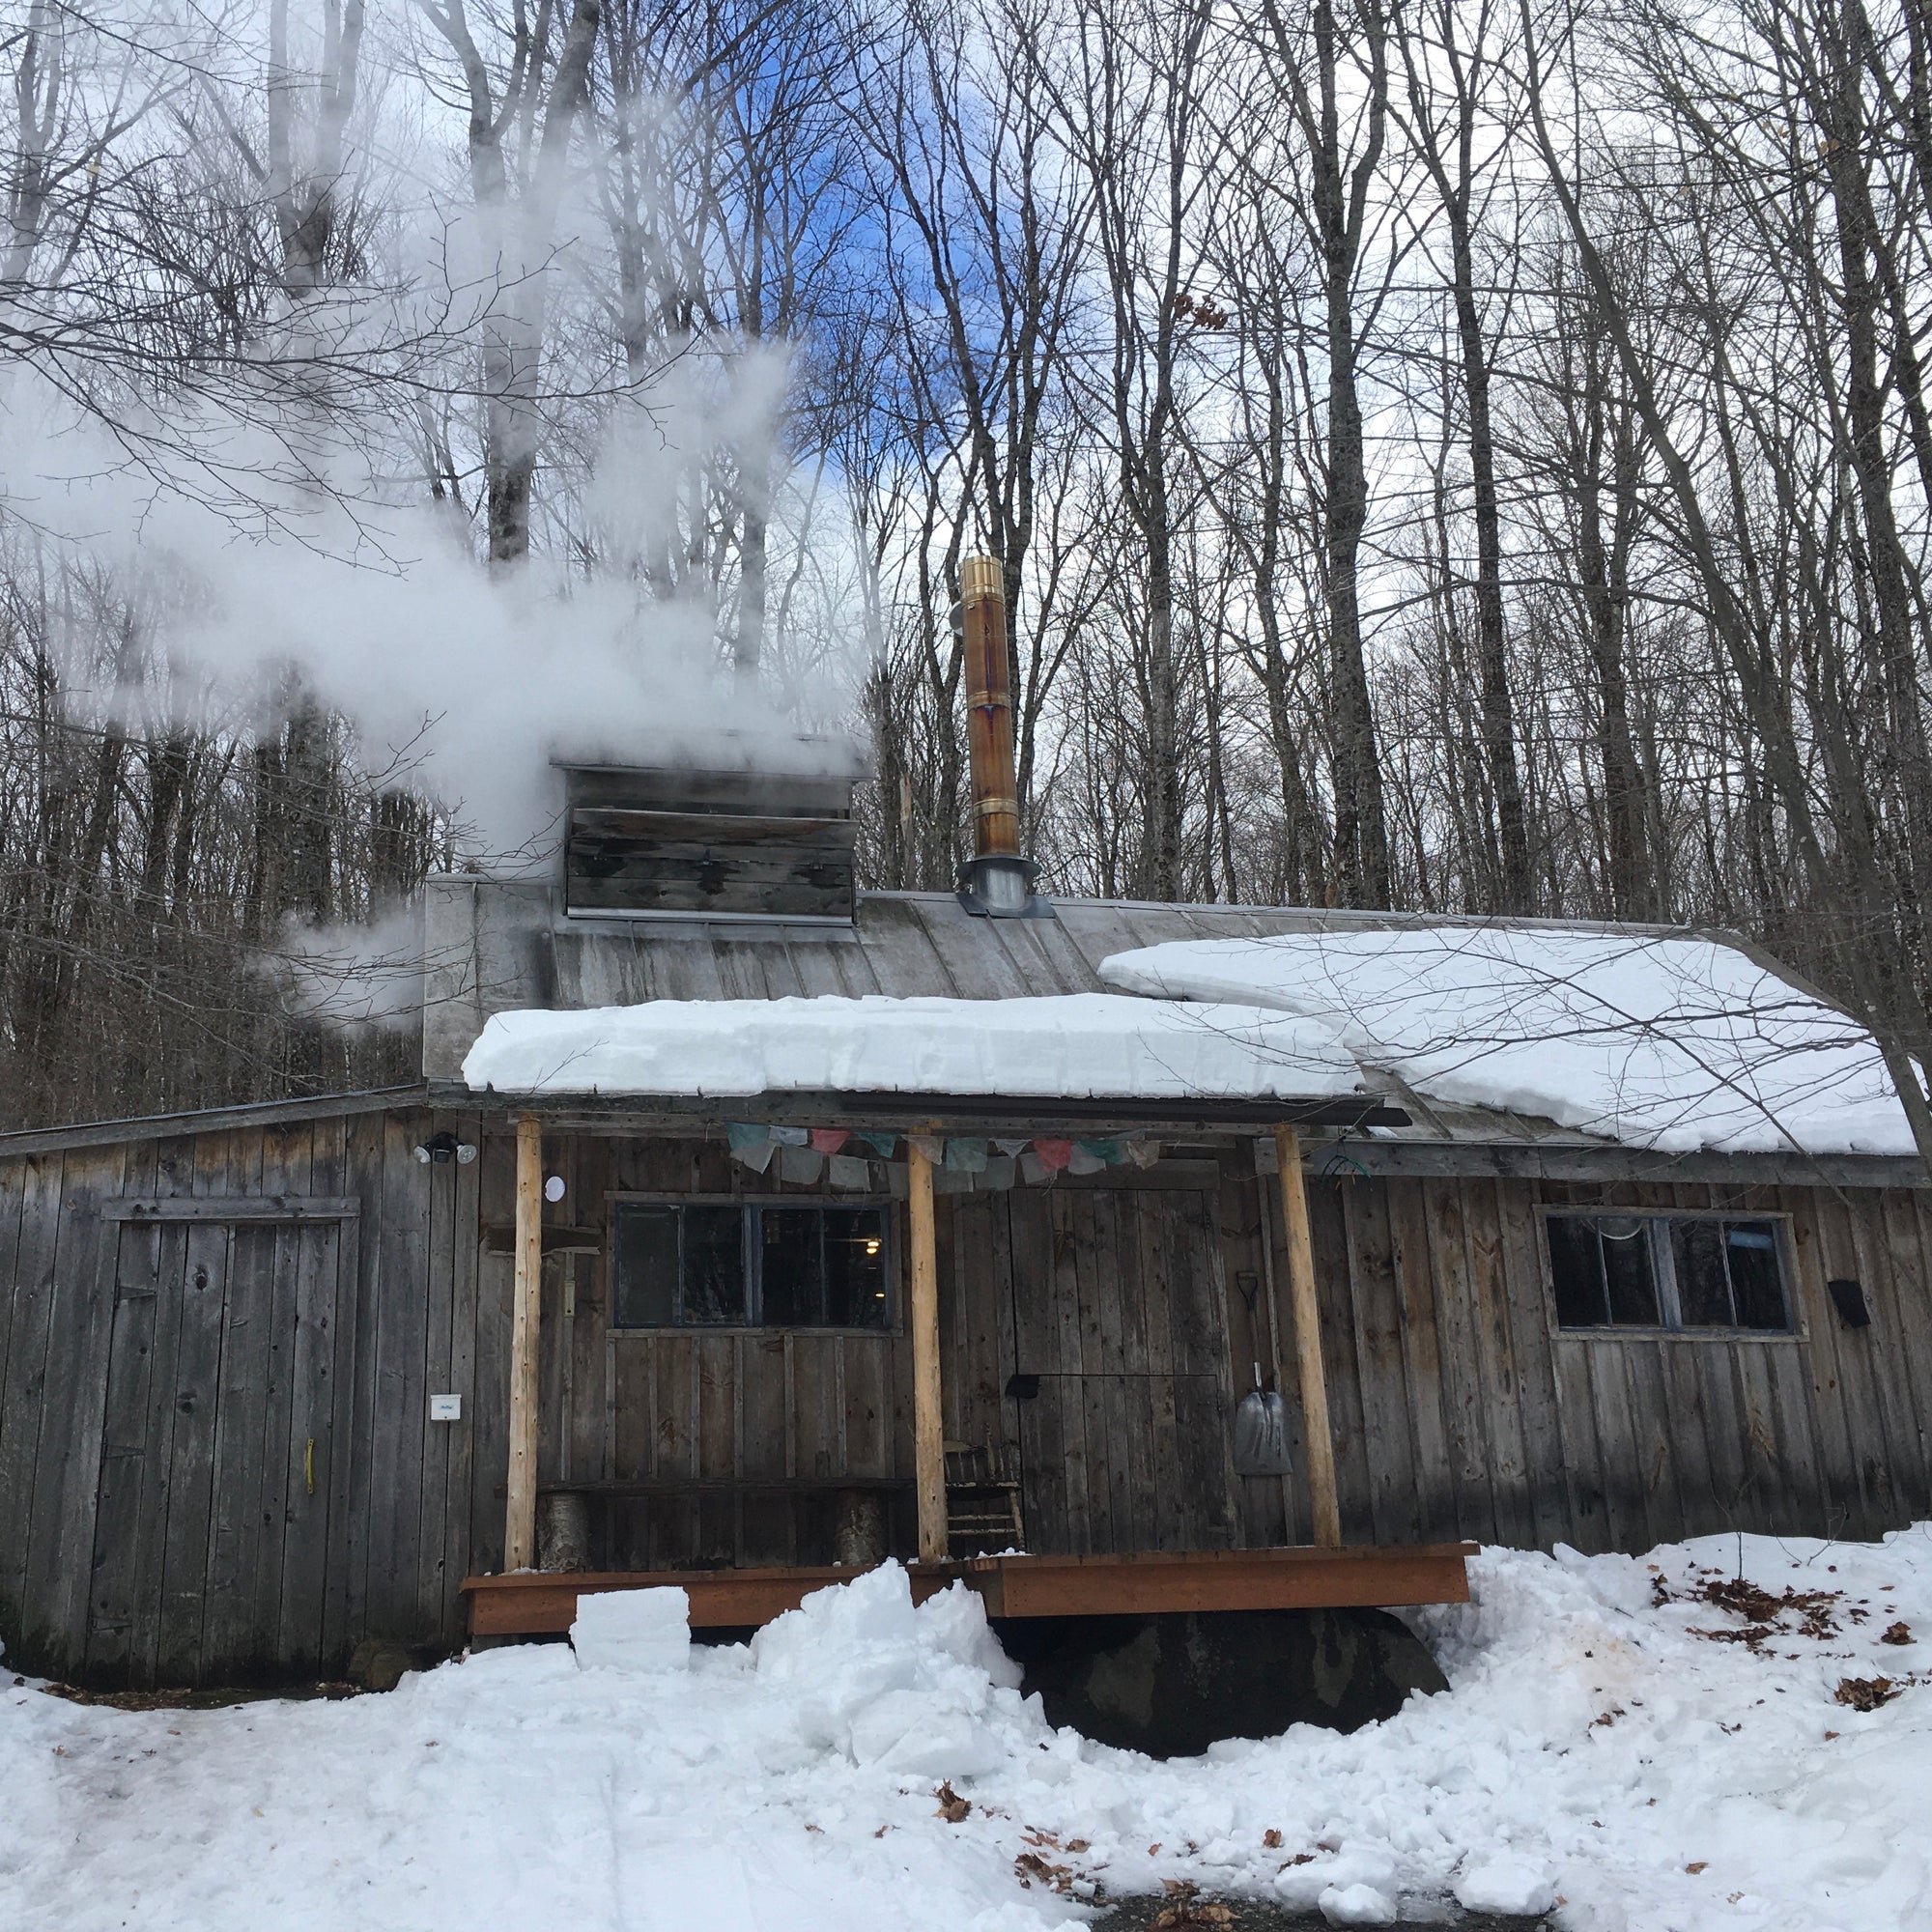 steam coming from sugarhouse